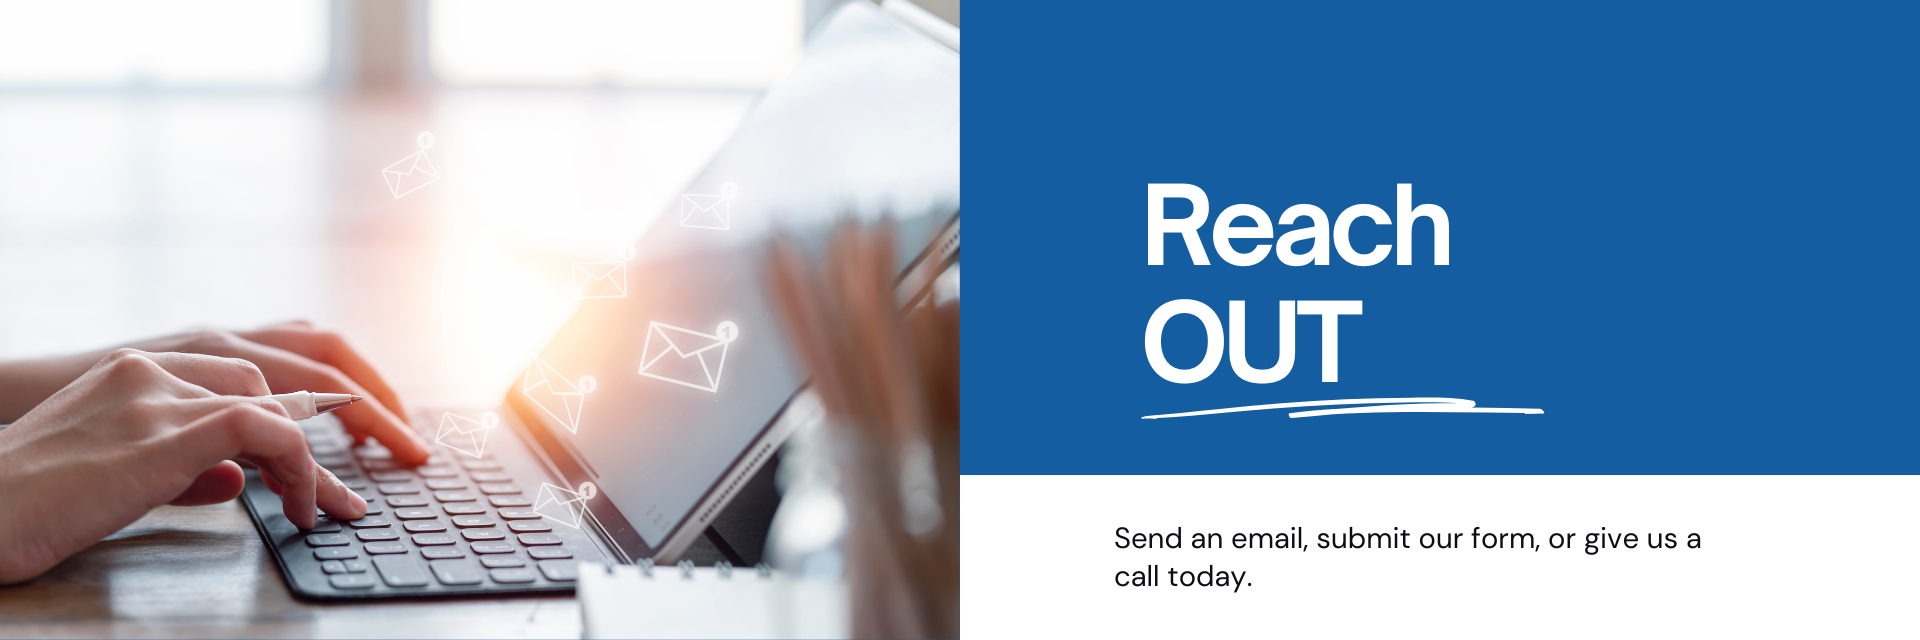 Send an email, submit our form or give us a call to talk through your marketing requirements.